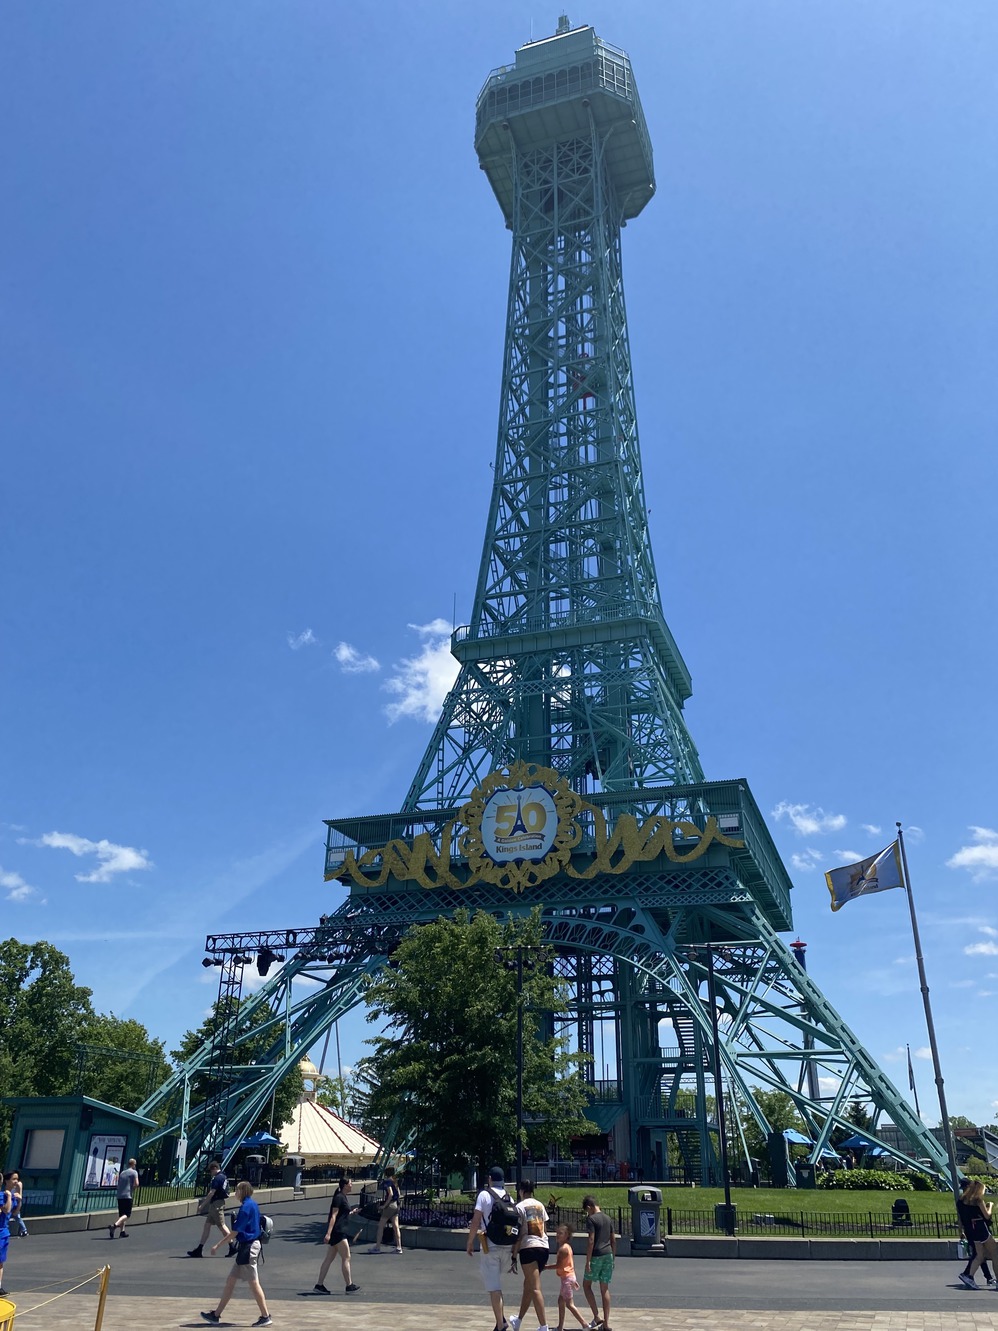 The Eiffel Tower at Kings Island stands at 314 feet.